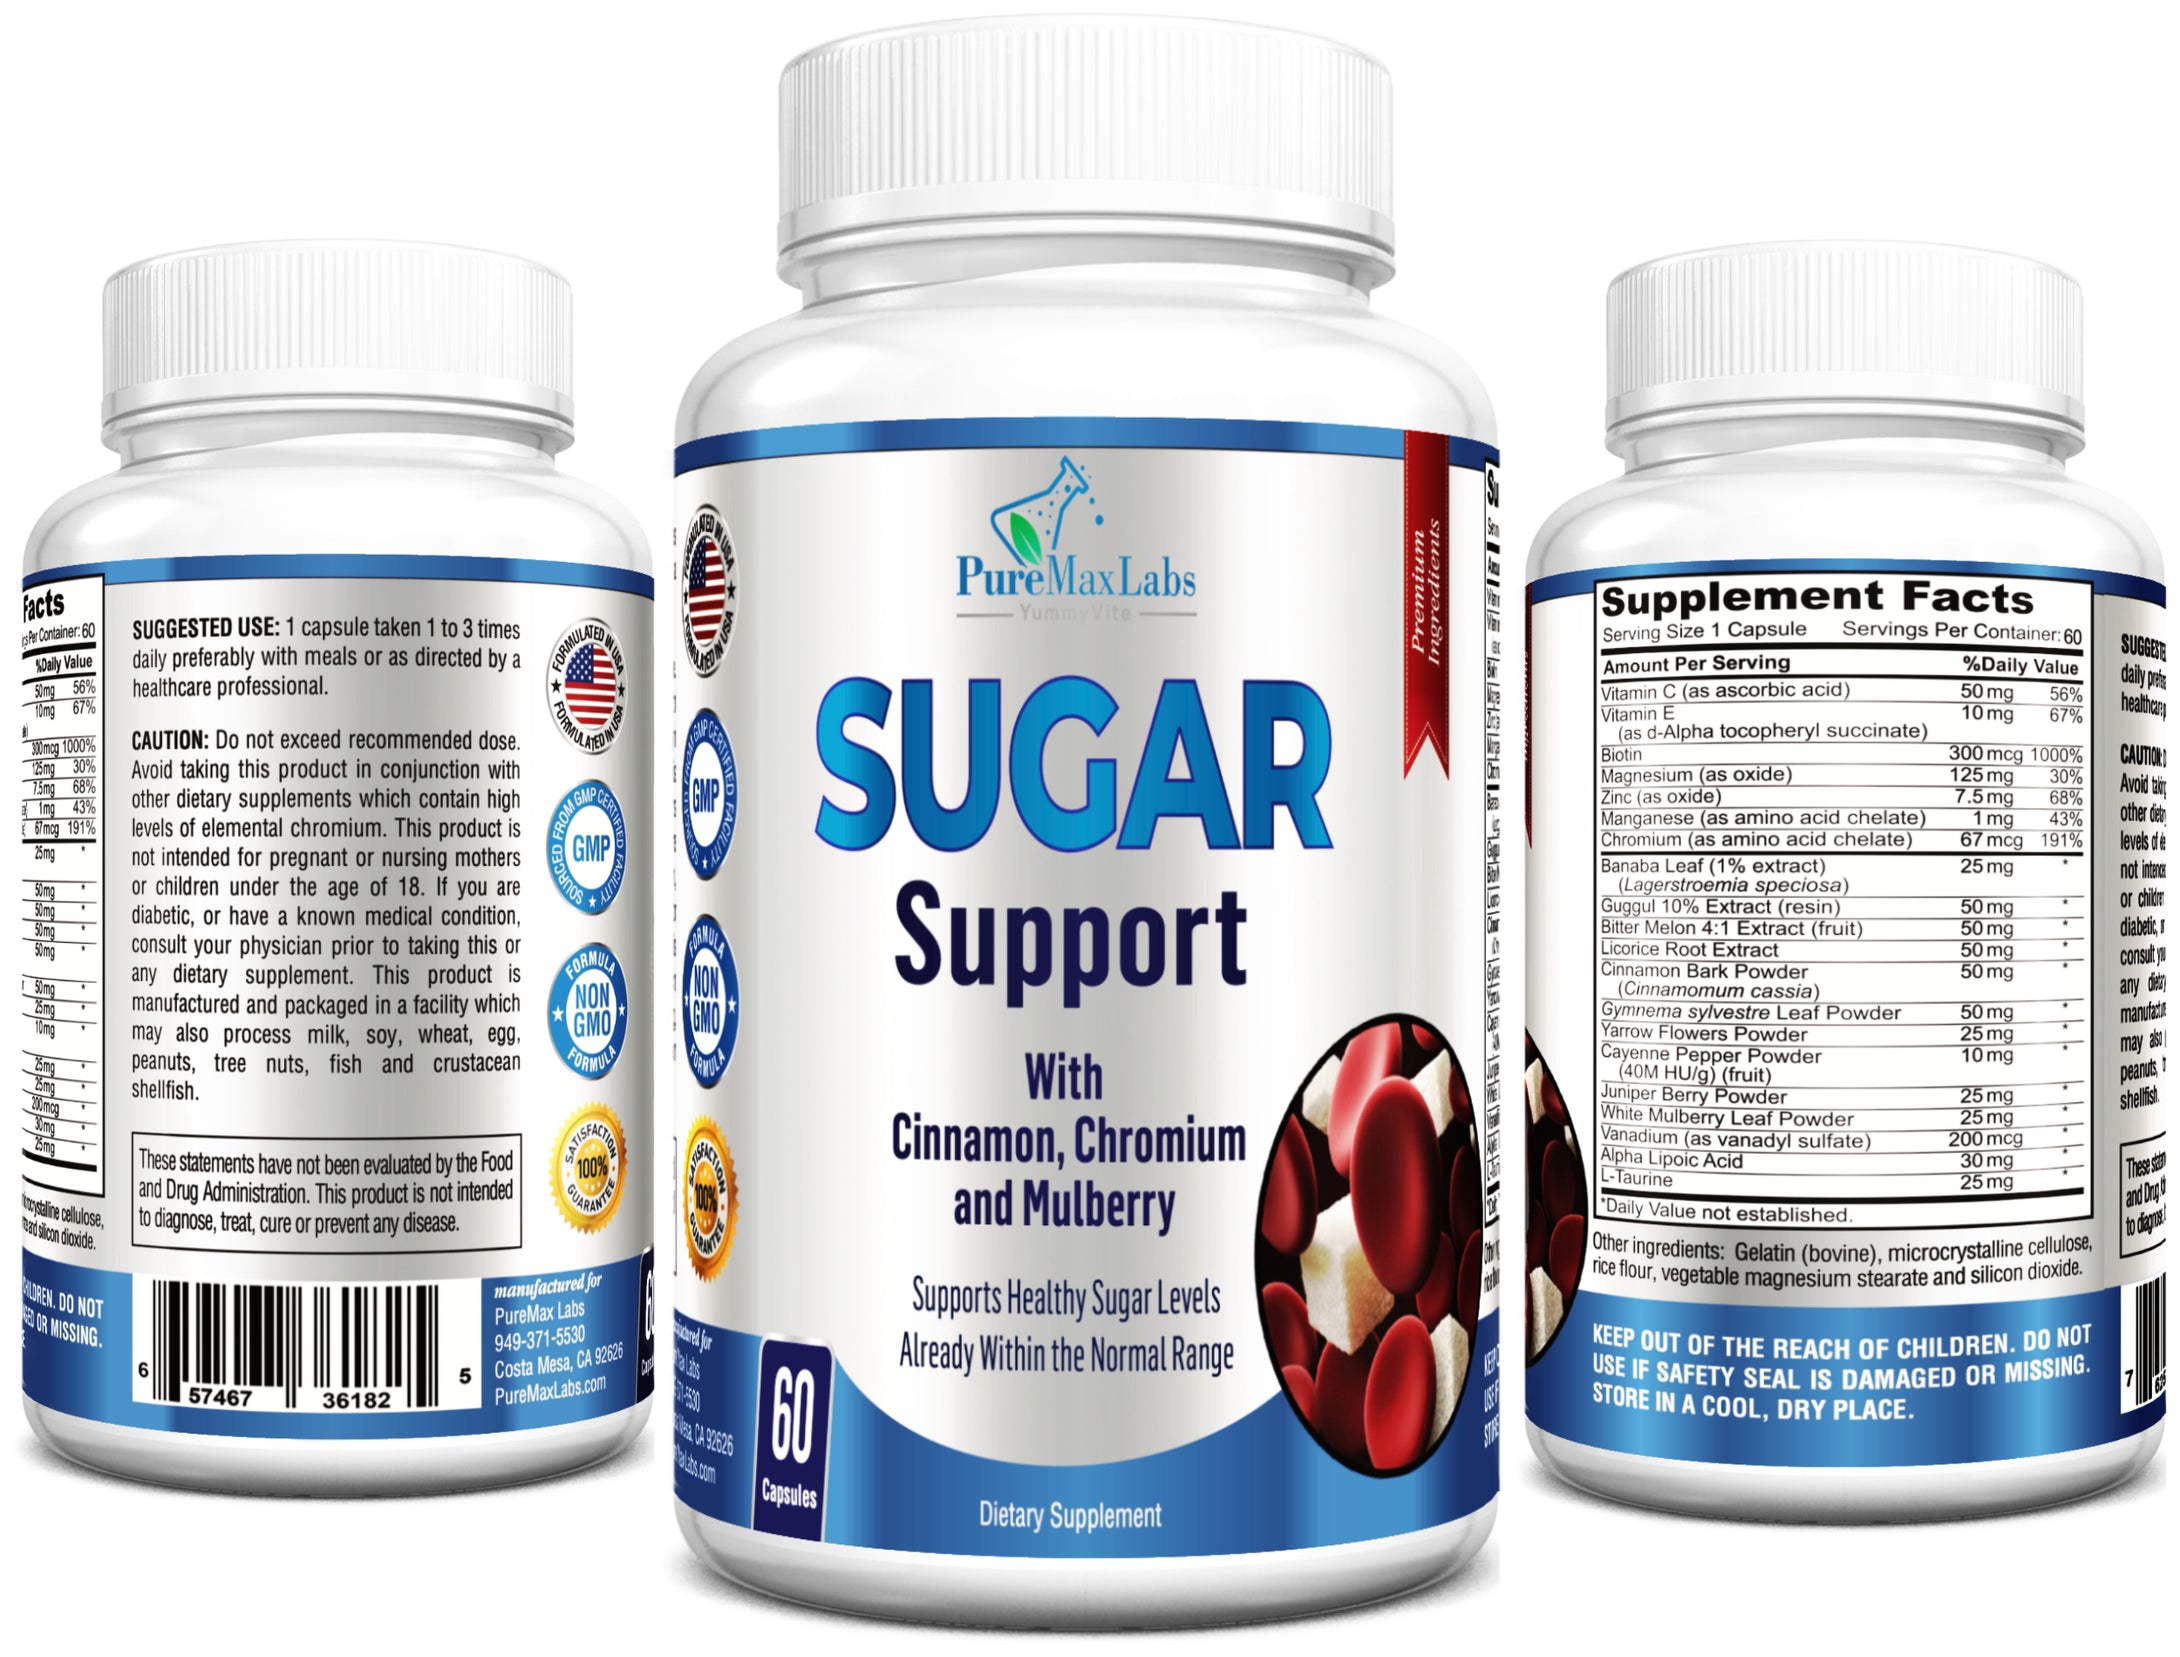 Blood Sugar Support Supplement with Cinnamon 60 Capsules